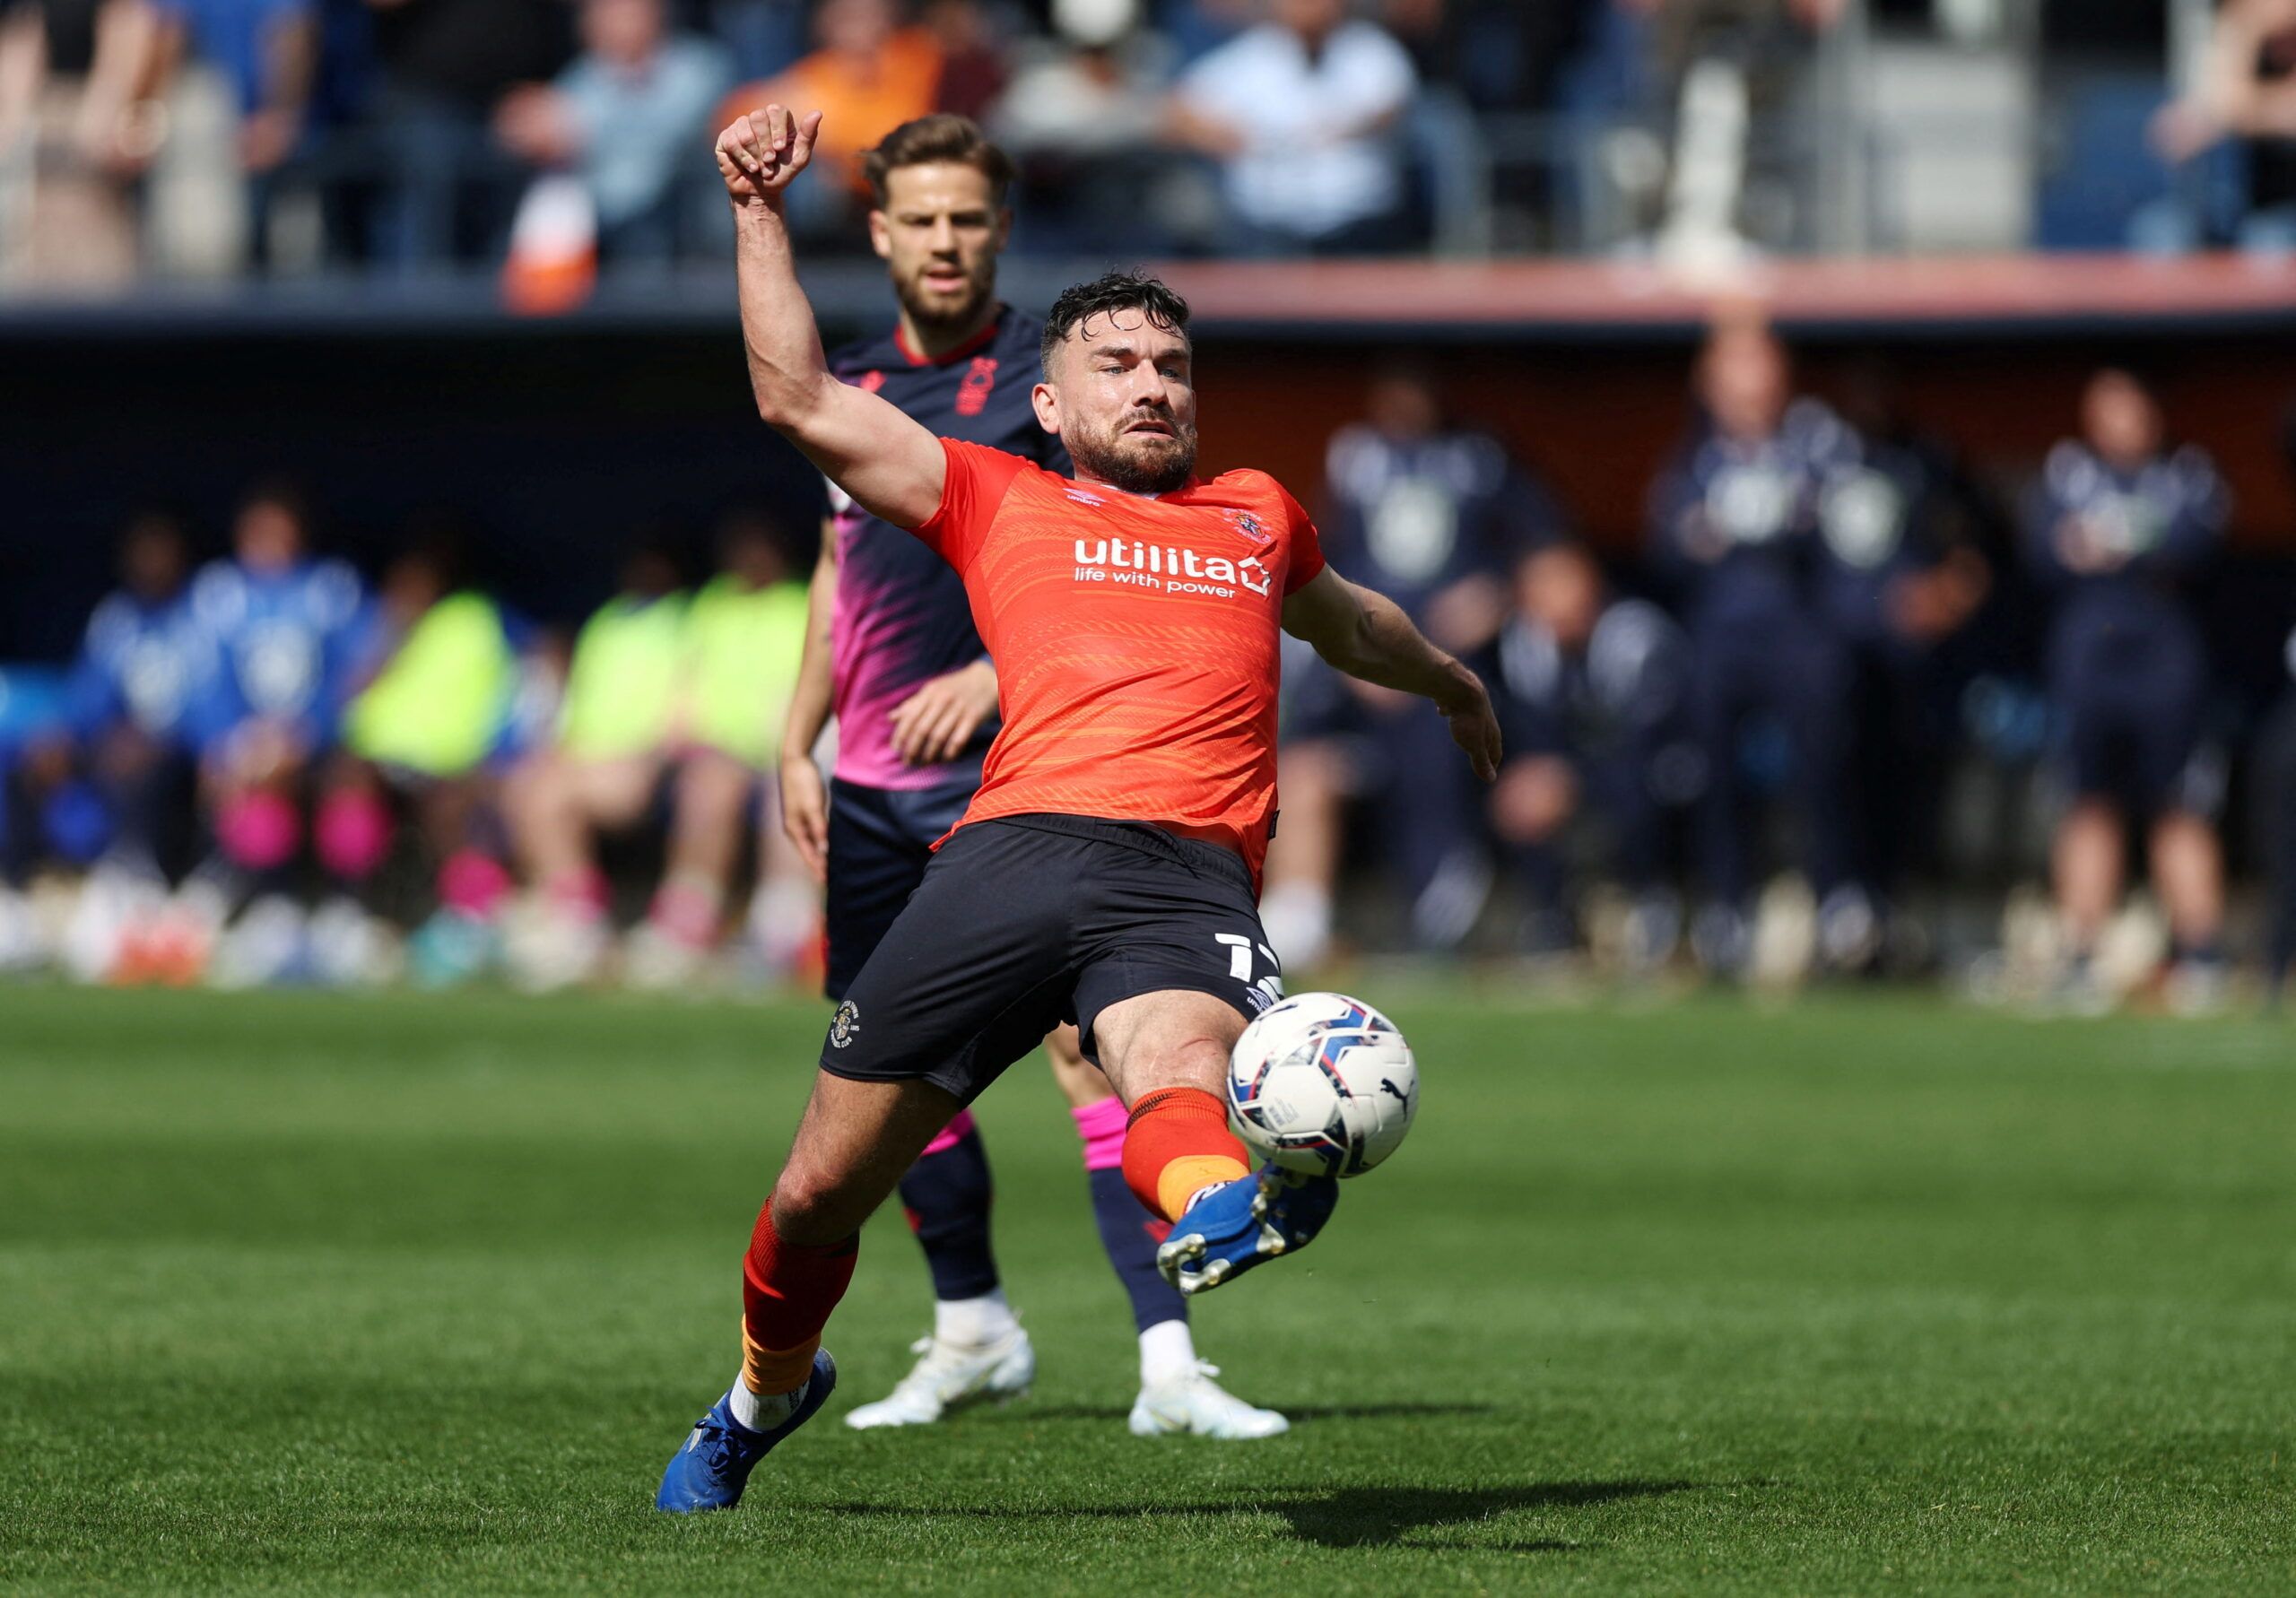 Soccer Football - Championship - Luton Town v Nottingham Forest - Kenilworth Road, Luton, Britain - April 15, 2022 Luton Town's Robert Snodgrass in action   Action Images/Matthew Childs  EDITORIAL USE ONLY. No use with unauthorized audio, video, data, fixture lists, club/league logos or 